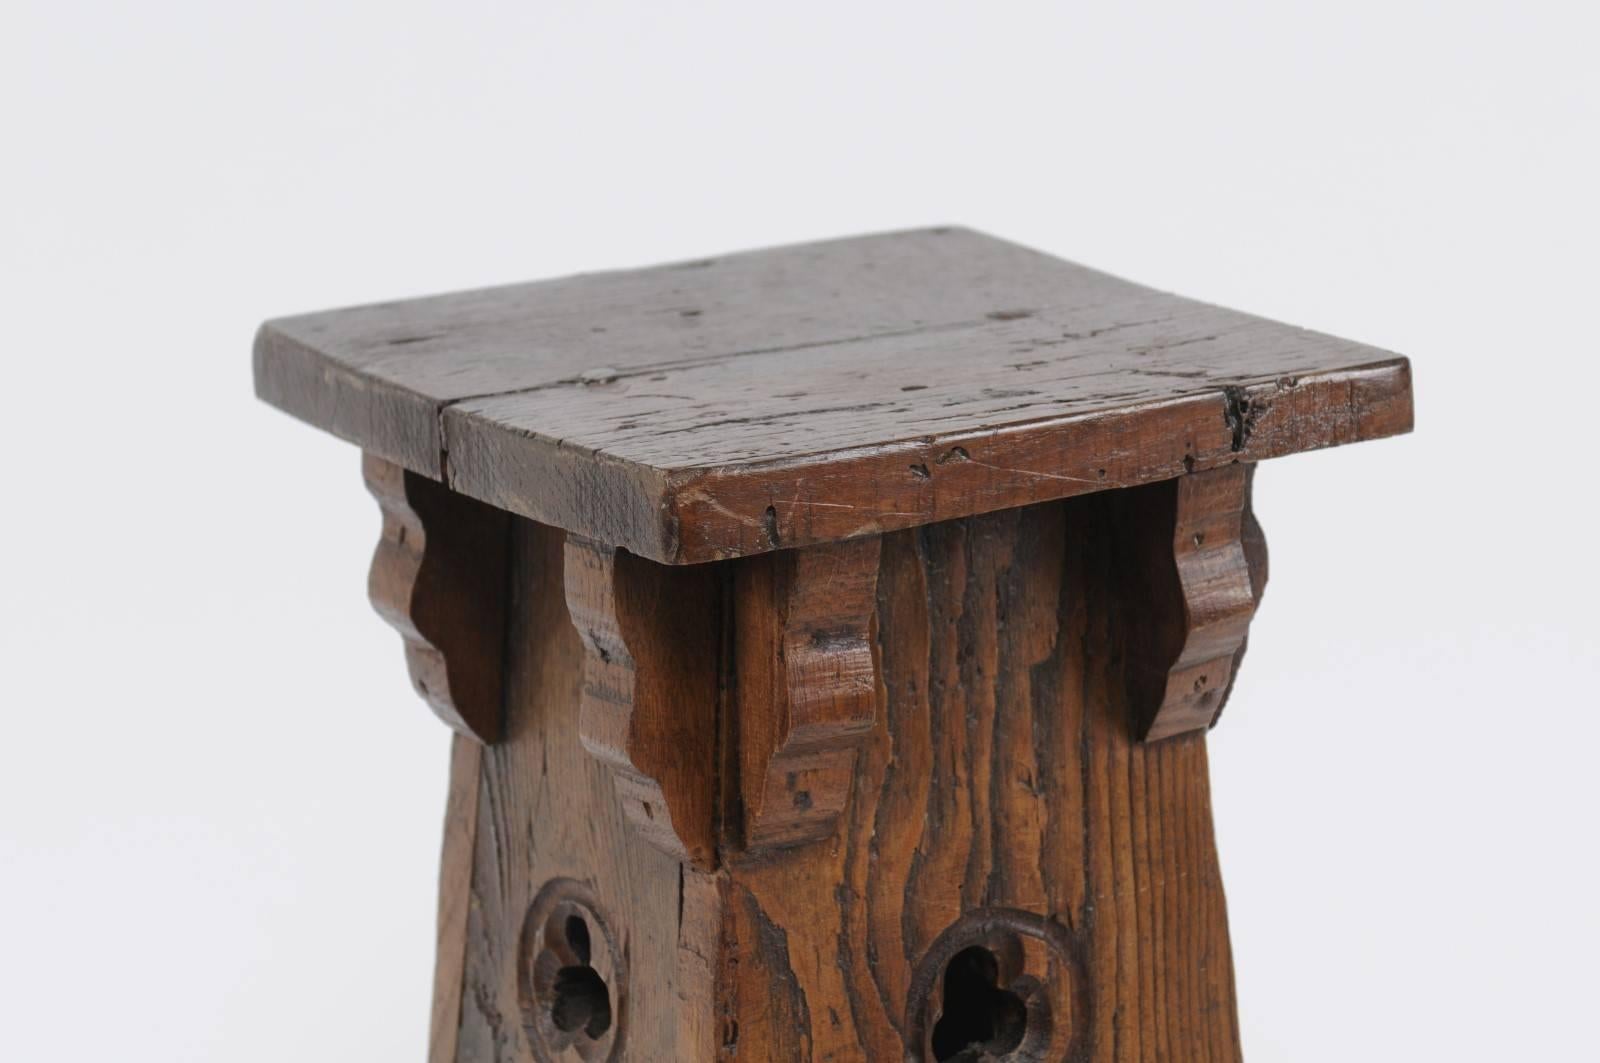 Rustic Spanish Oak Stool with Trefoil Motifs and Brackets from the Early 20th Century